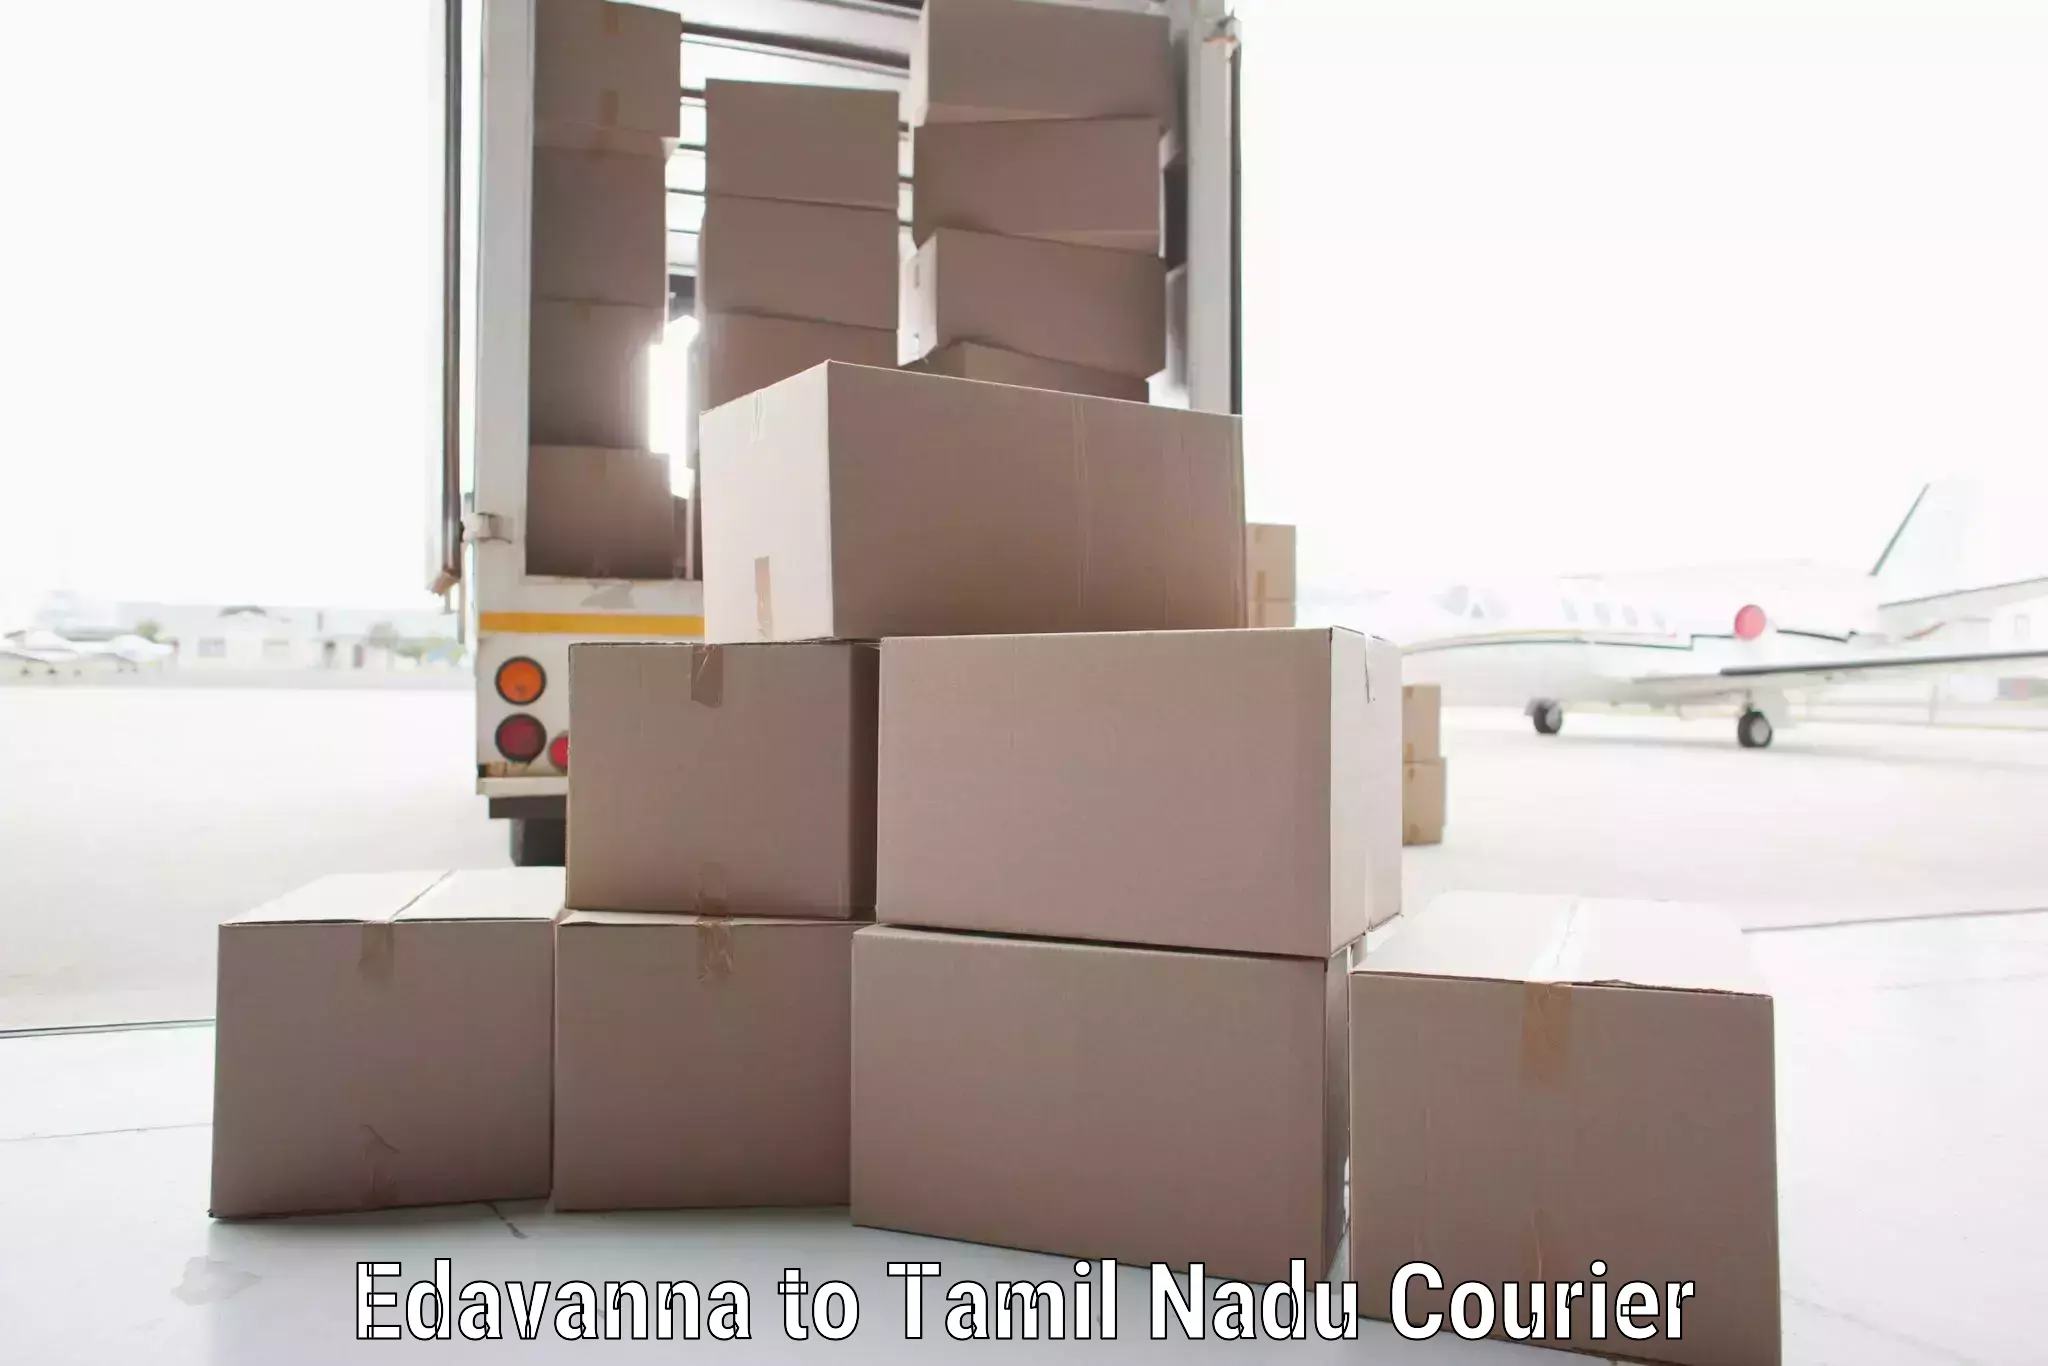 Package delivery network Edavanna to Tamil Nadu